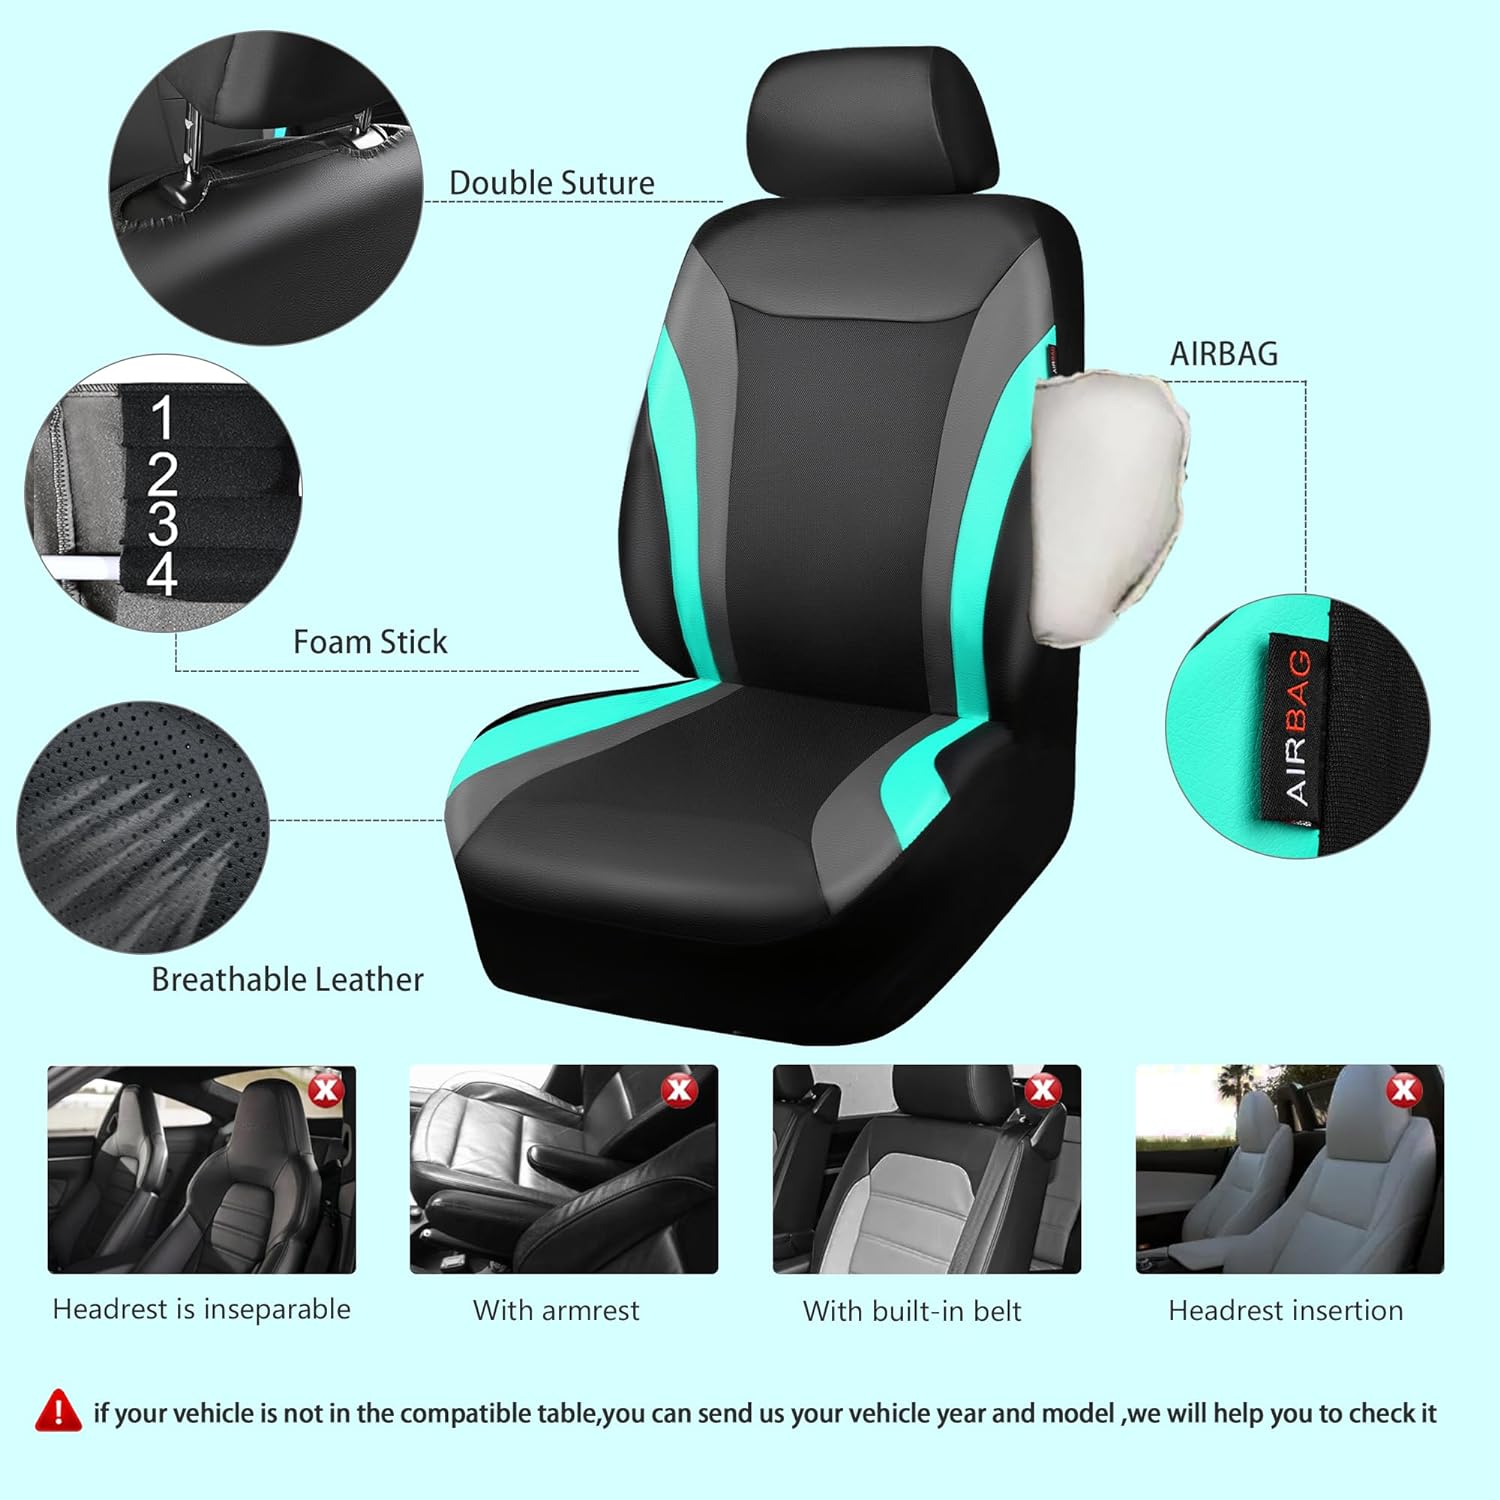 CAR PASS Leather Car Seat Covers Full Set,Waterproof Automotive Seat Covers for Cars SUV Sedan Truck,Airbag Compatible,5mm Composite Sponge,Sporty Universal Fit for Cute Women Girl (Black Purple)